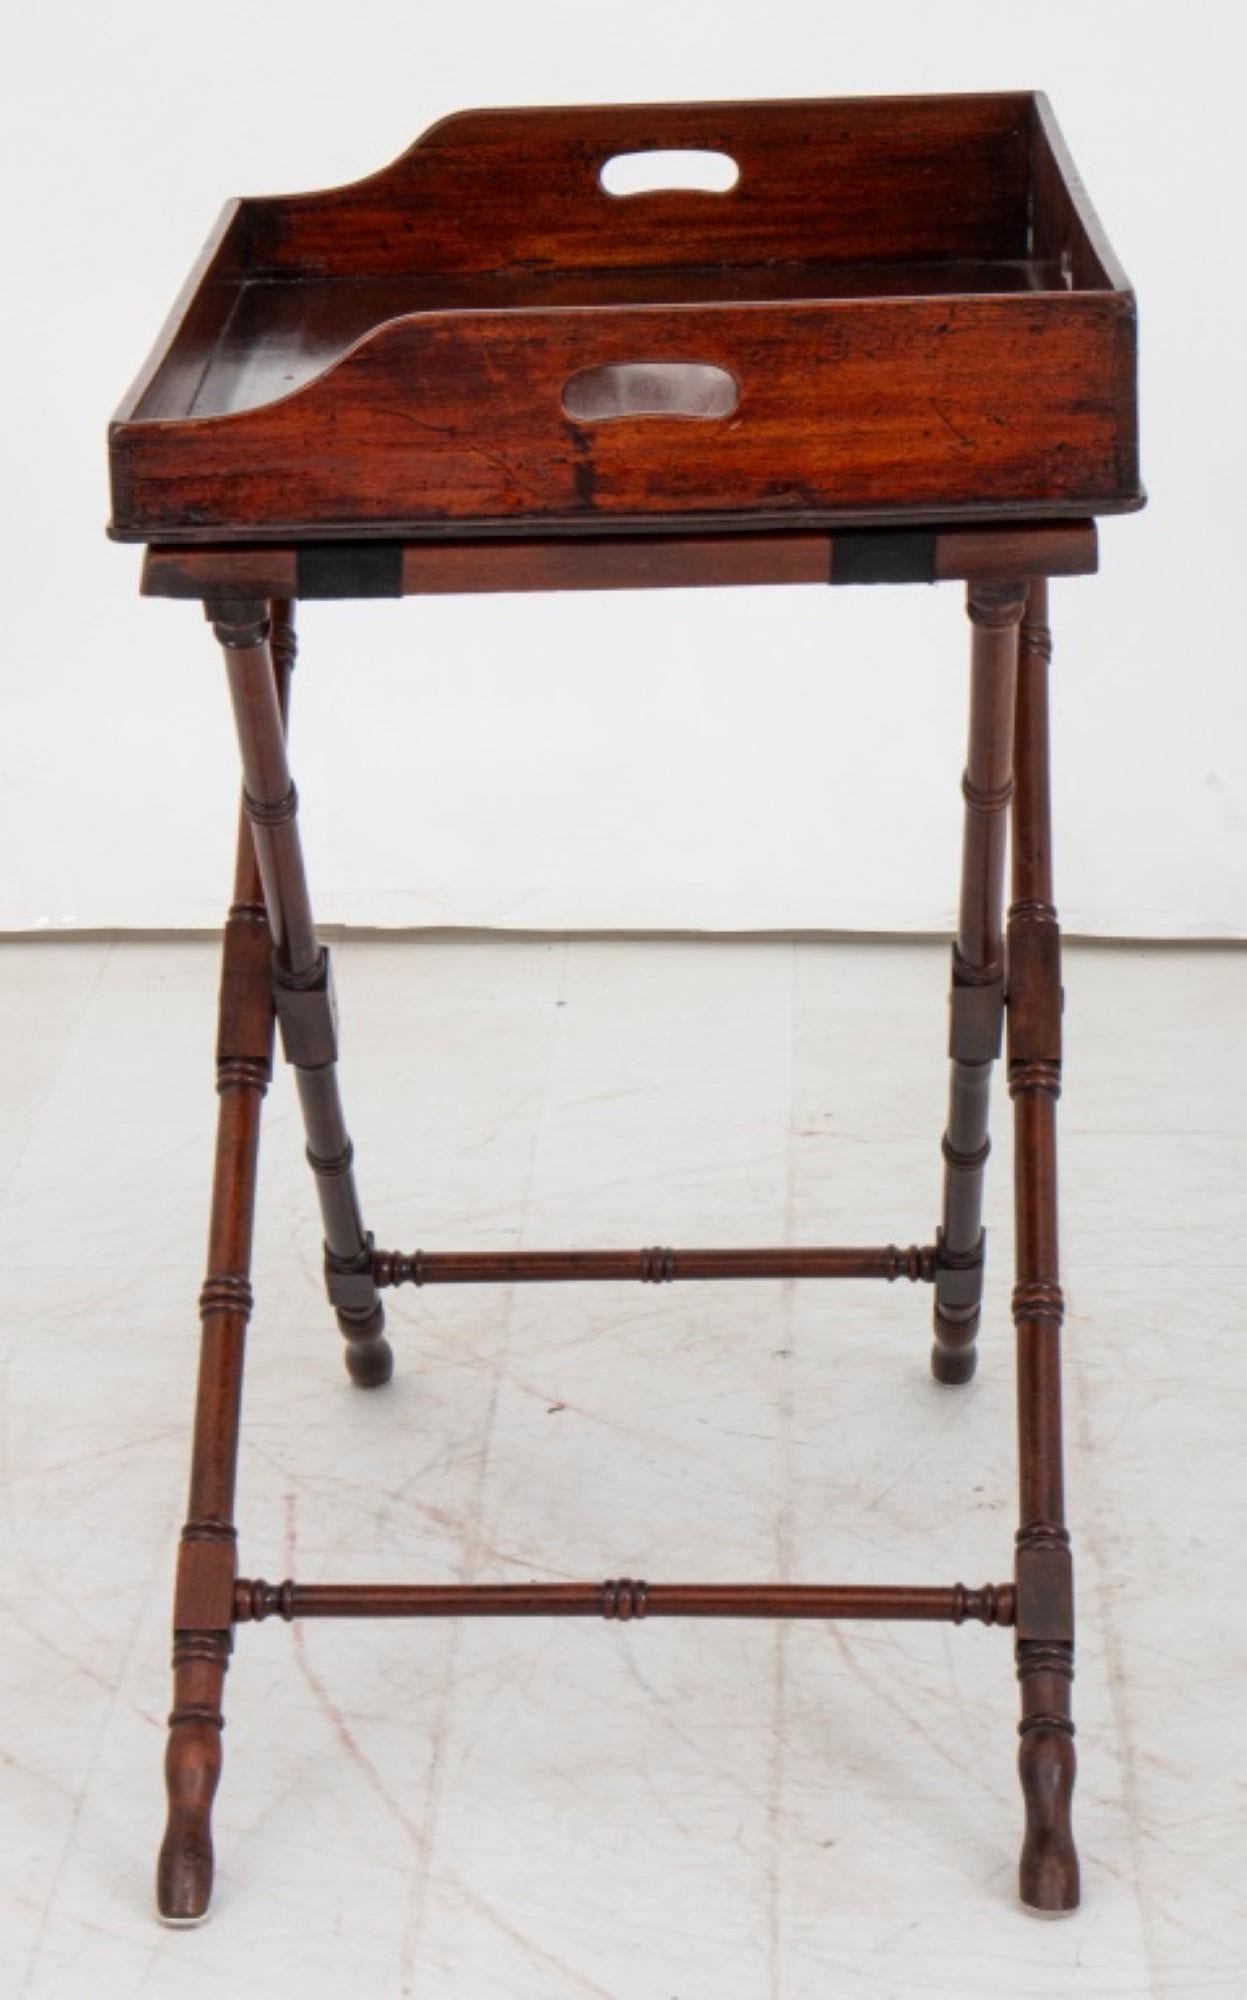 Edwardian Mahogany Butler's Tray on Turned Wood Stand, circa 1910. Provenance: From the 50 East 89th Street estate of a 20th-century.

Dealer: S138XX
